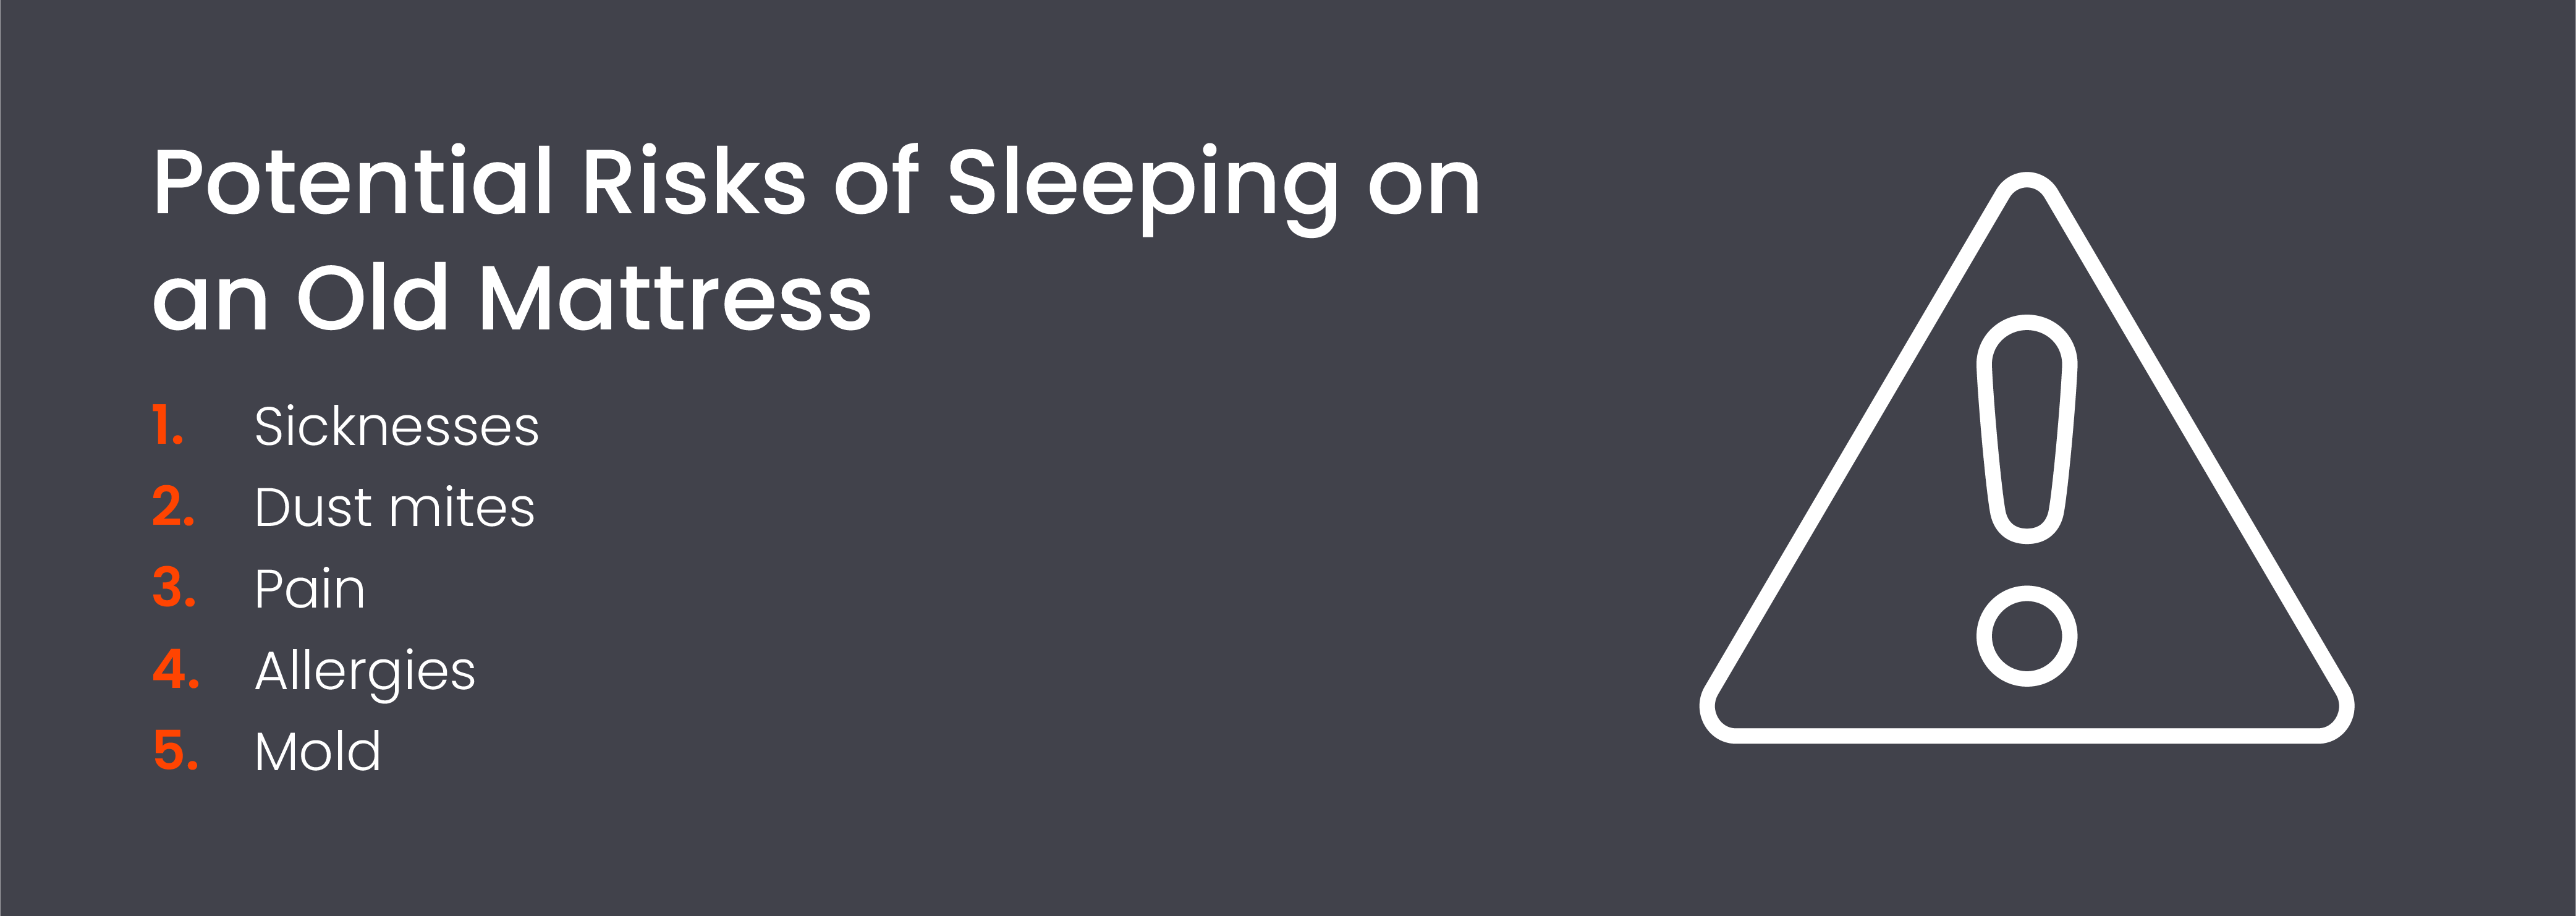 Potential risks of sleeping on an old mattress